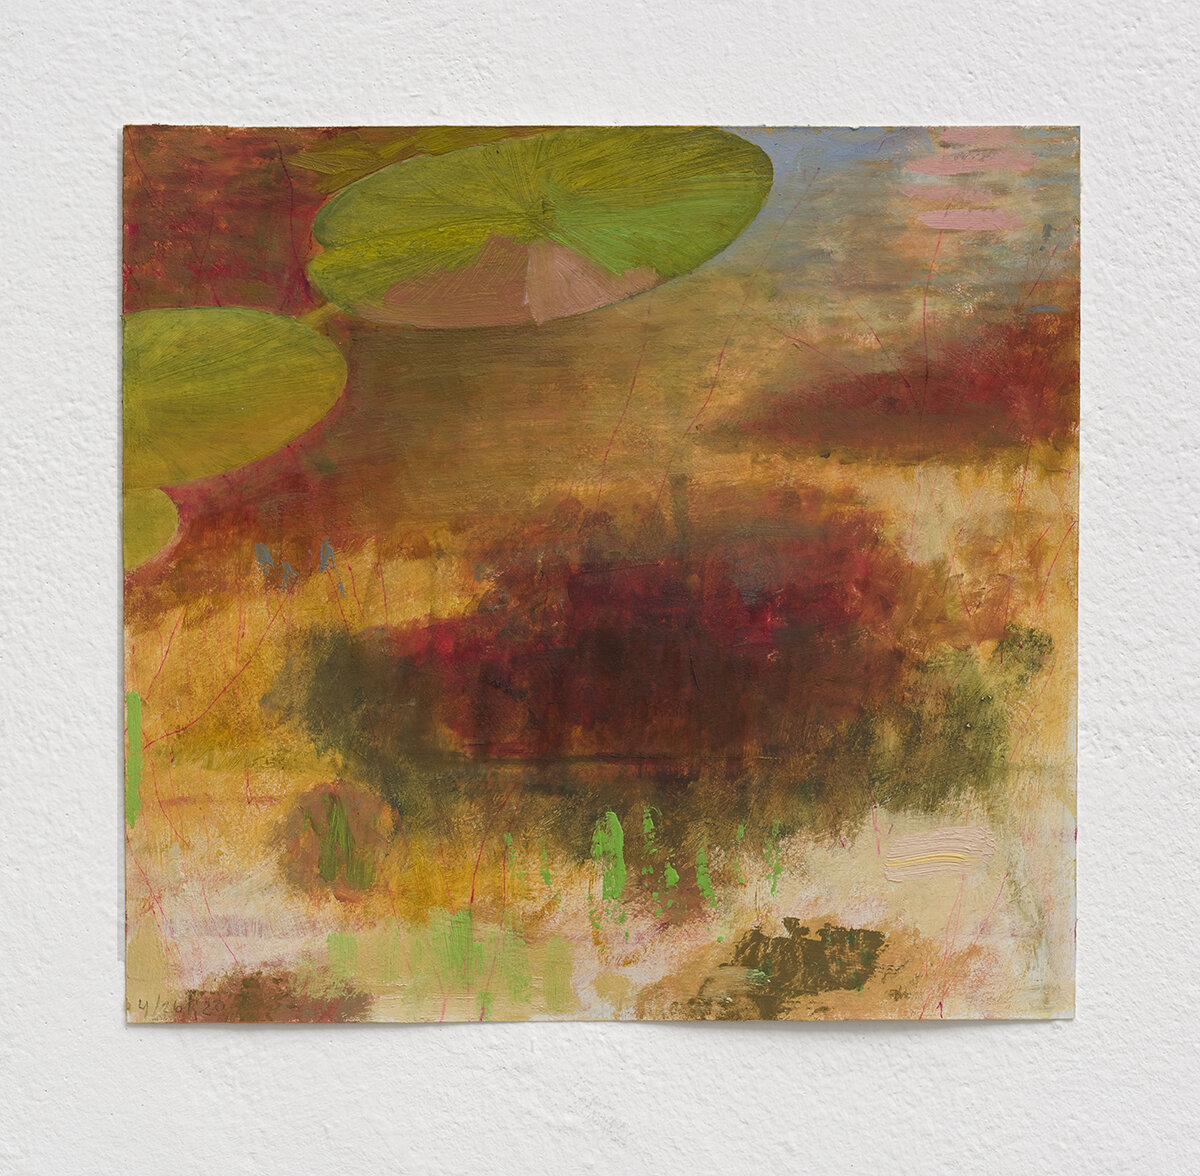   Study for Pond on Wheels XV   Oil on paper 8 ½ x 9 inches 21.5 x 23 cm 2020 